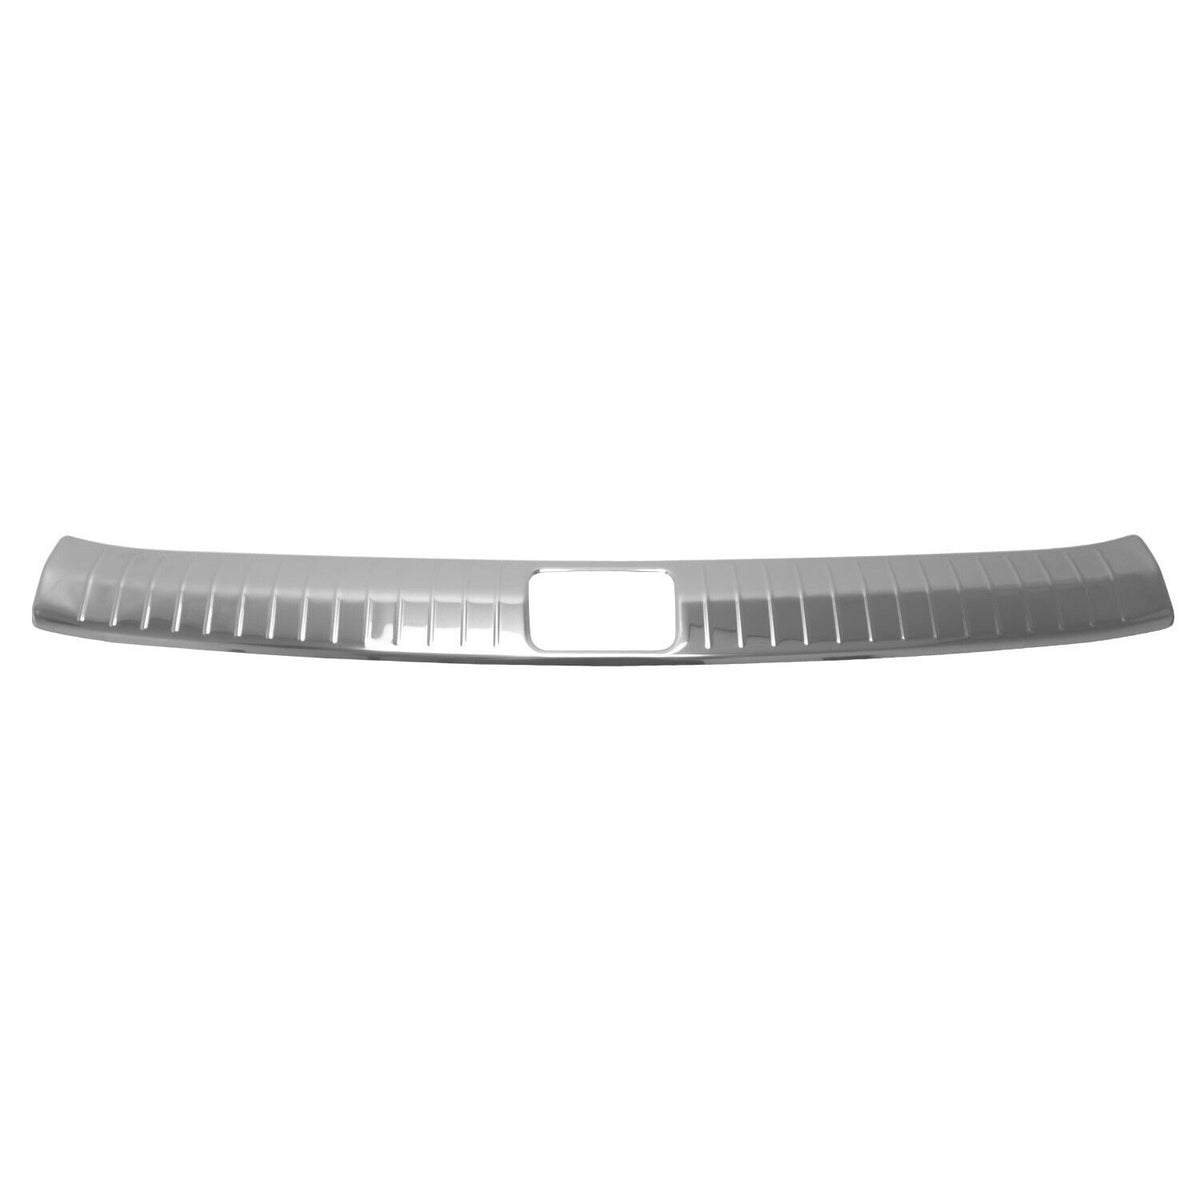 Interior loading sill protection bumper for Kia Sportage 2015-2021 stainless steel chrome